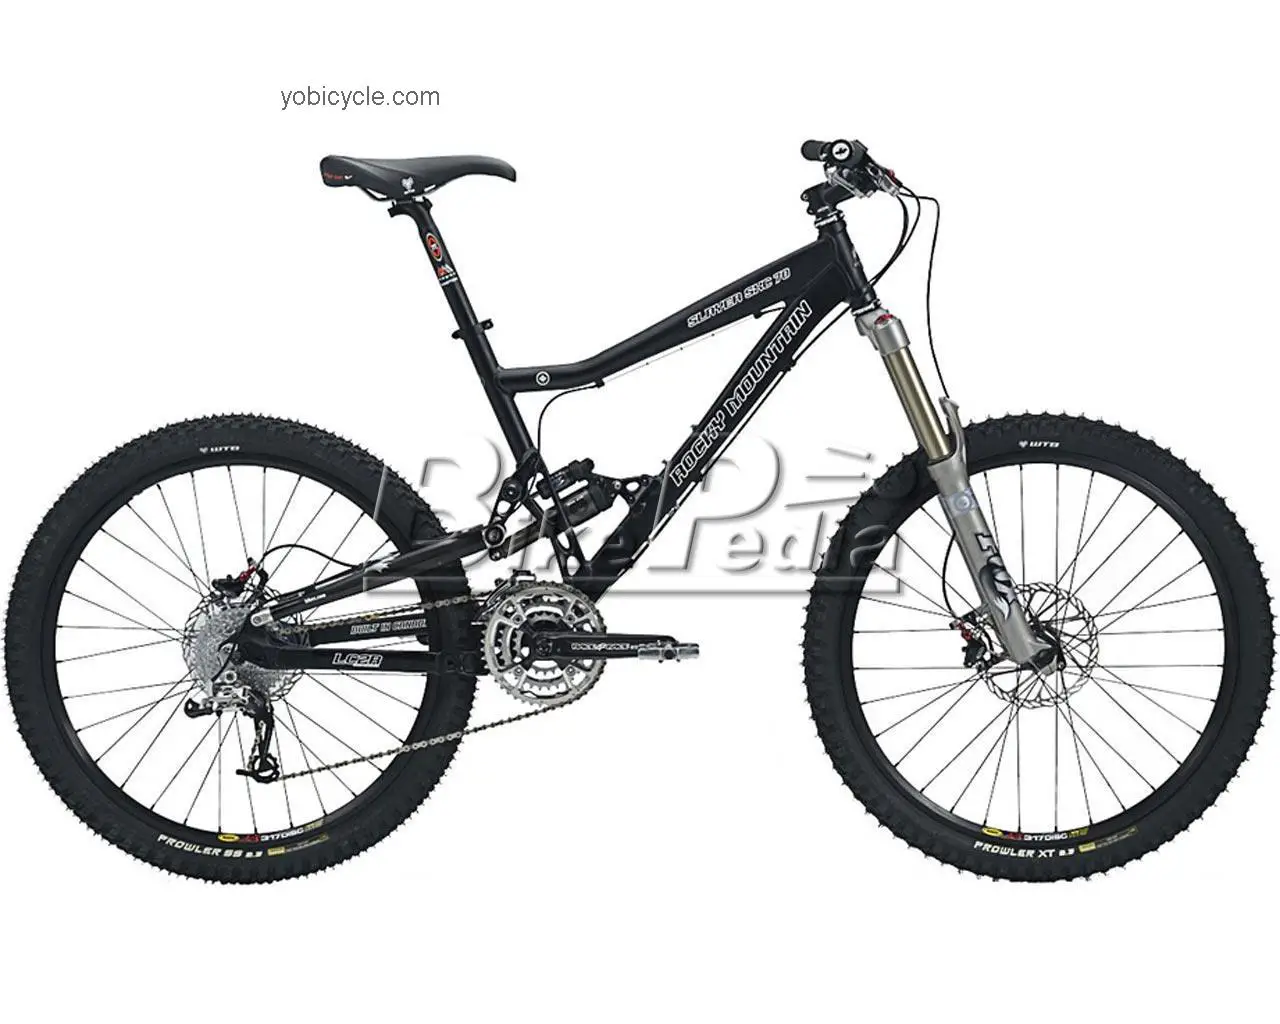 Rocky Mountain Slayer SXC 70 2009 comparison online with competitors